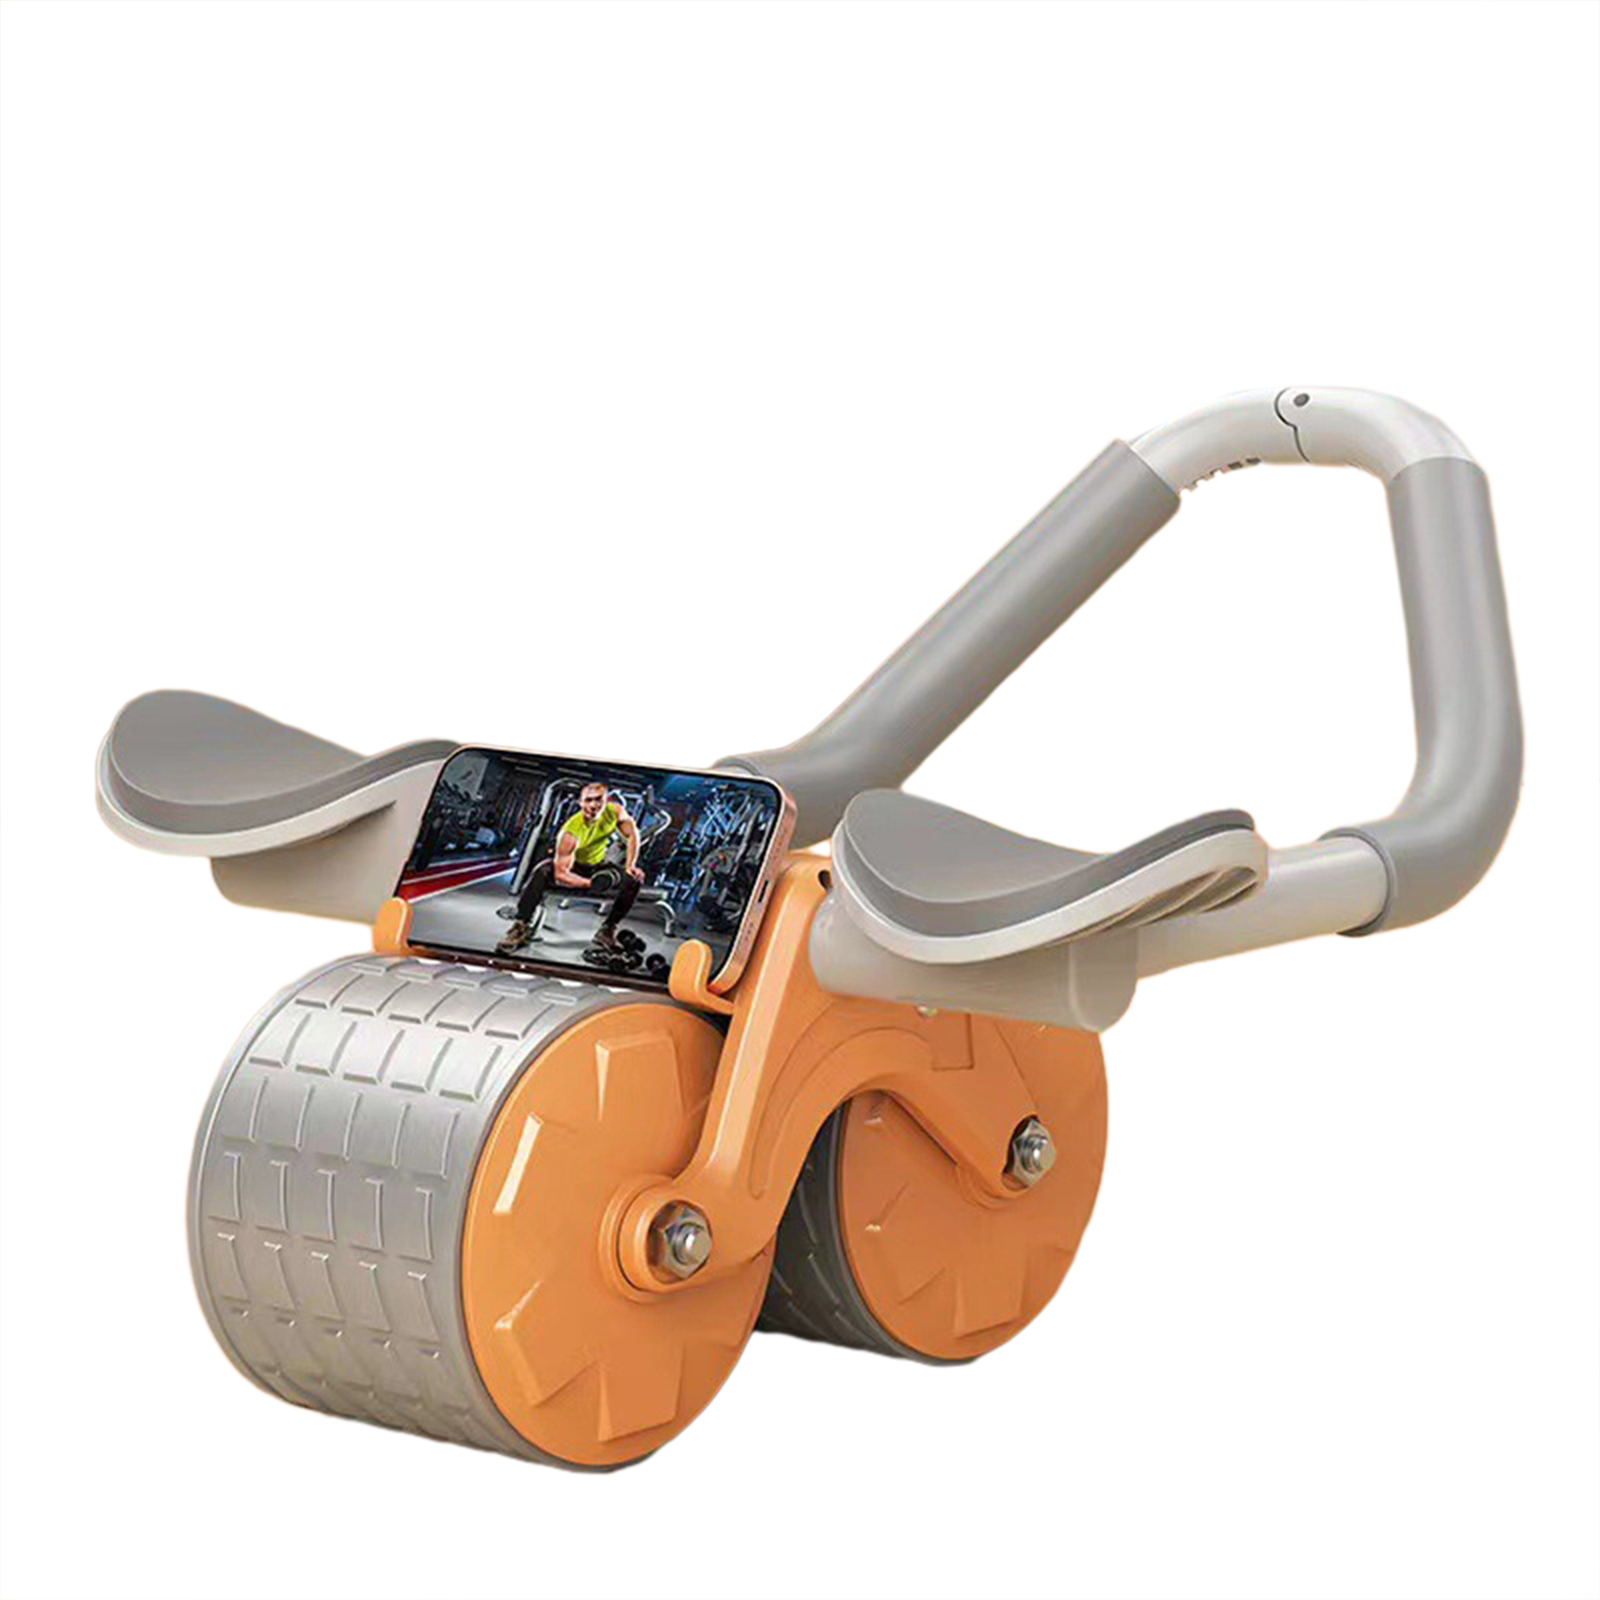 Abdominal Exercise Roller With Timer & Pad Silent Automatic Rebound Widened Wheel Base